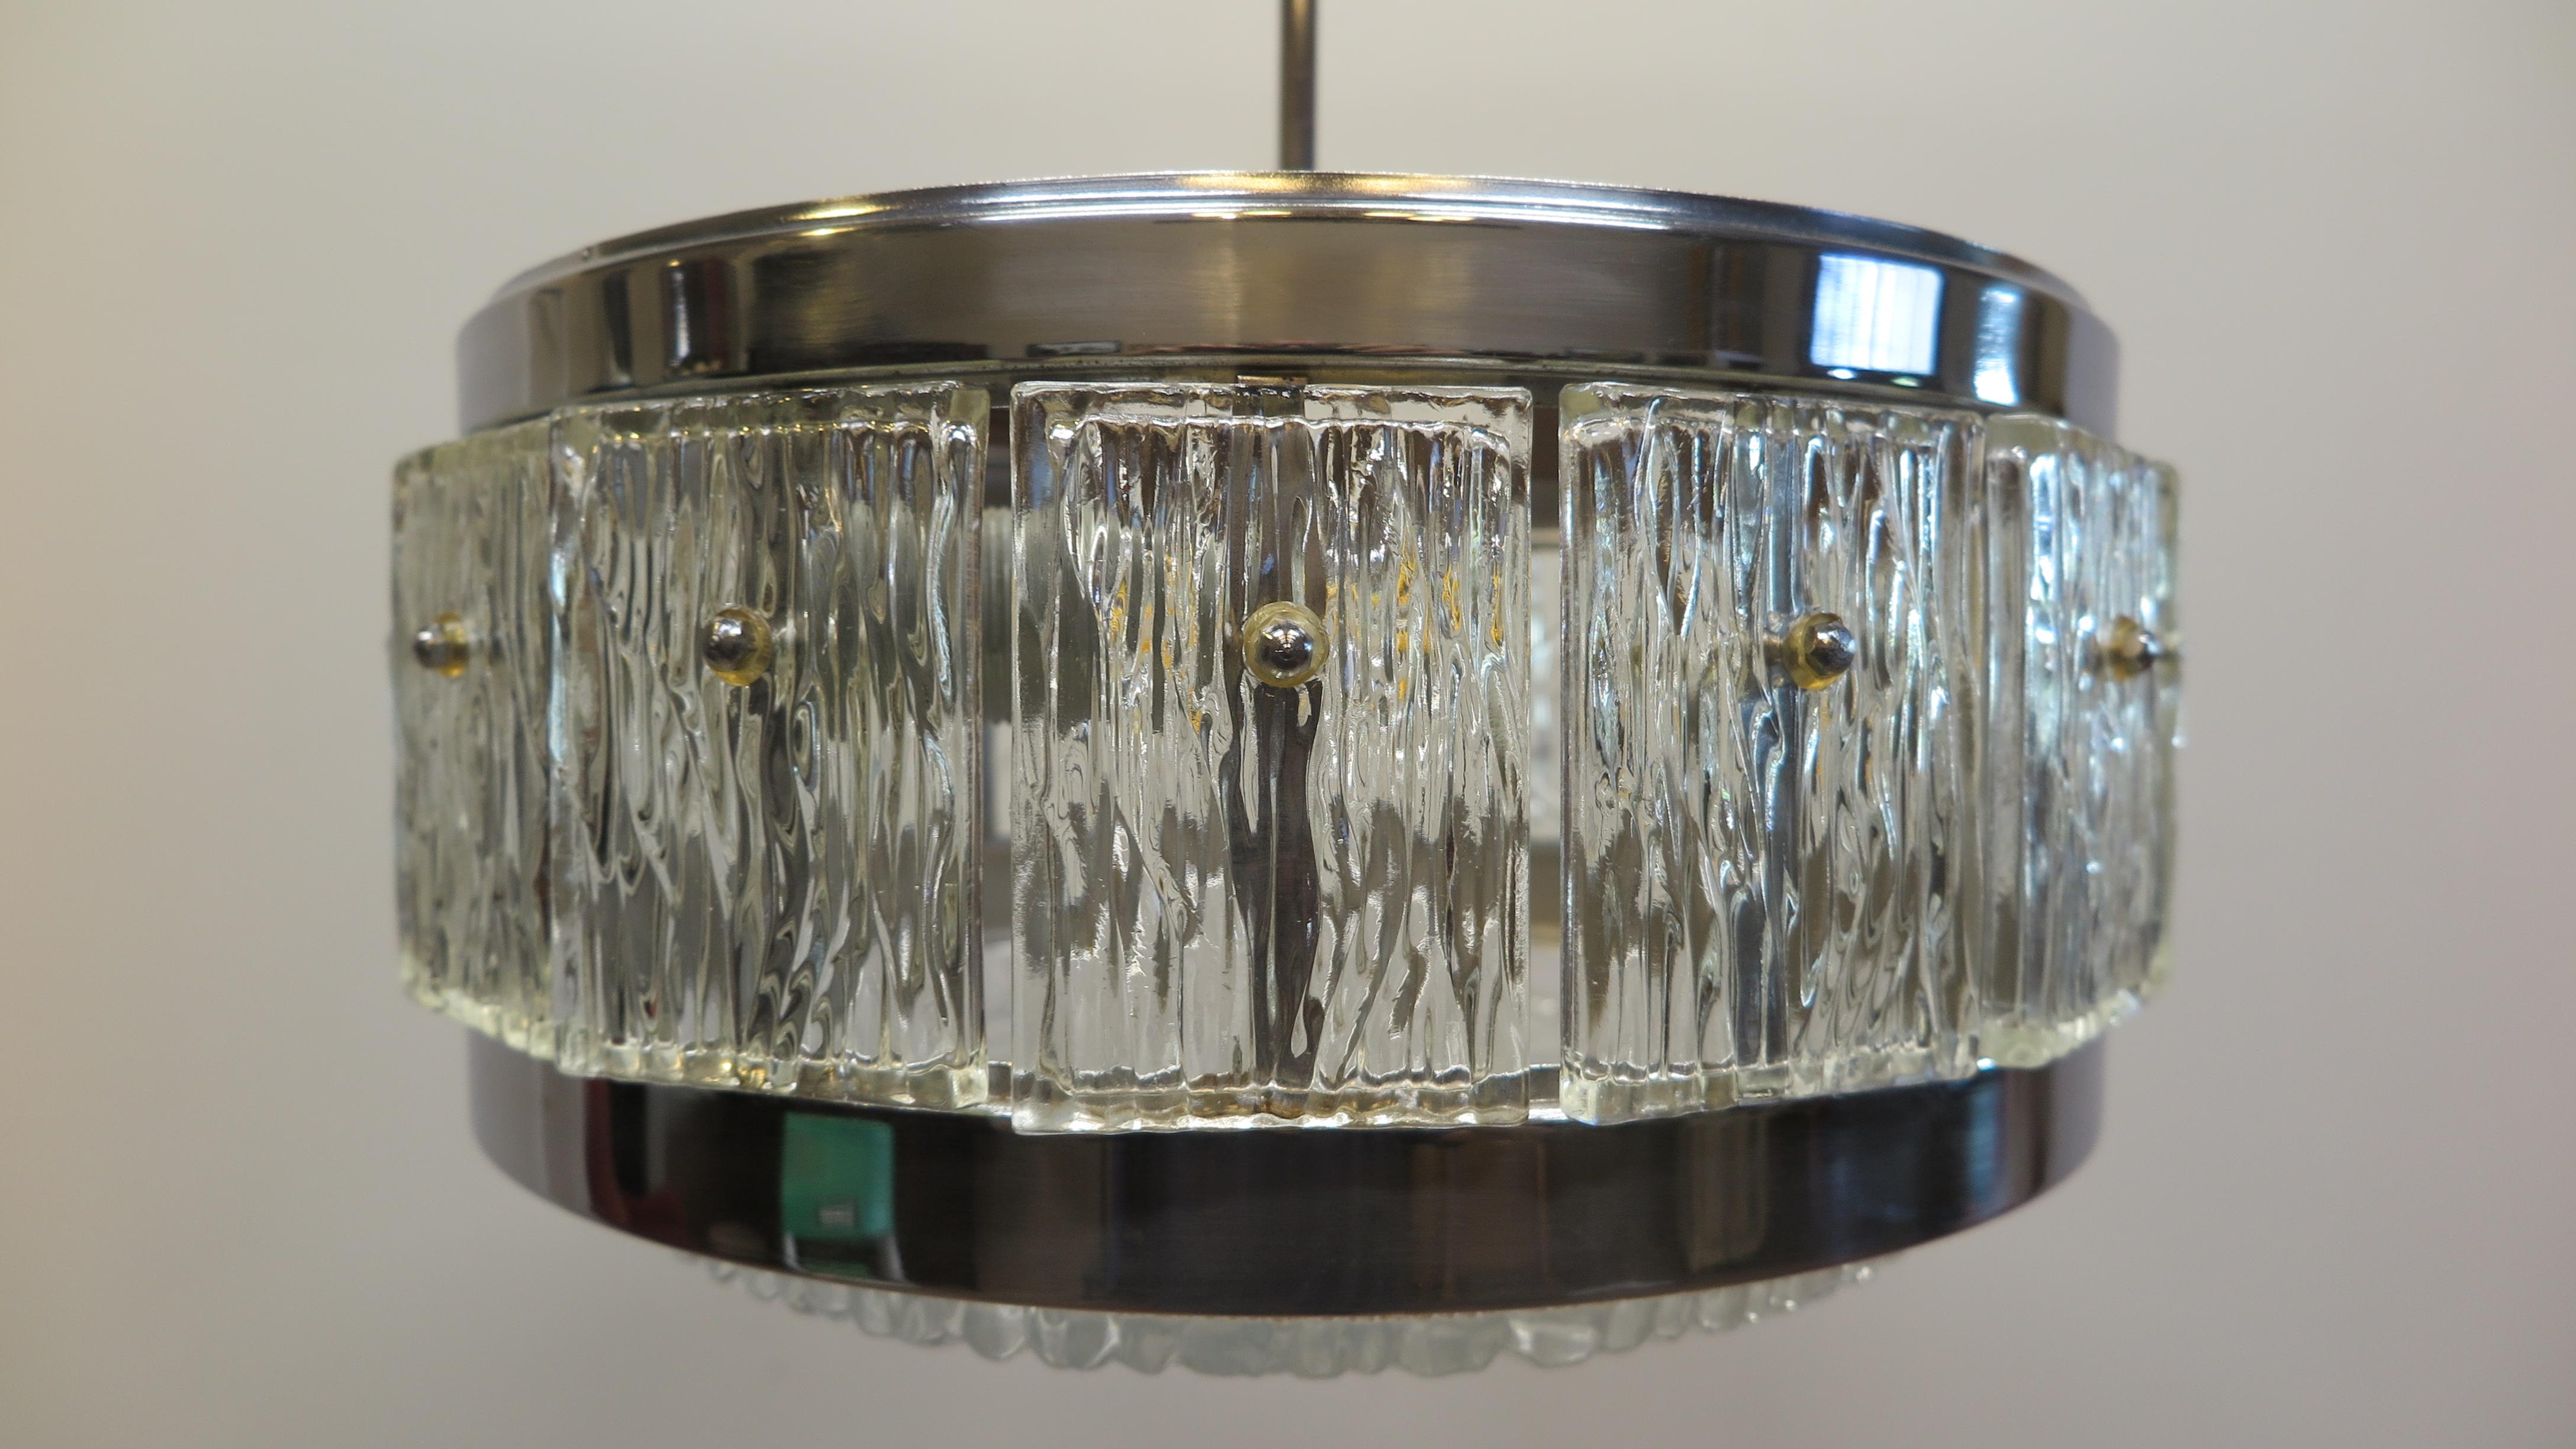 Doria Leuchten Mid Century Molded Glass Pendant Light 1960s.  Chrome plated circular steel frame with beautifully molded glass panels and matching molded glass diffuser.   Fourteen rectangular molded - pressed glass panels with a wave type pattern